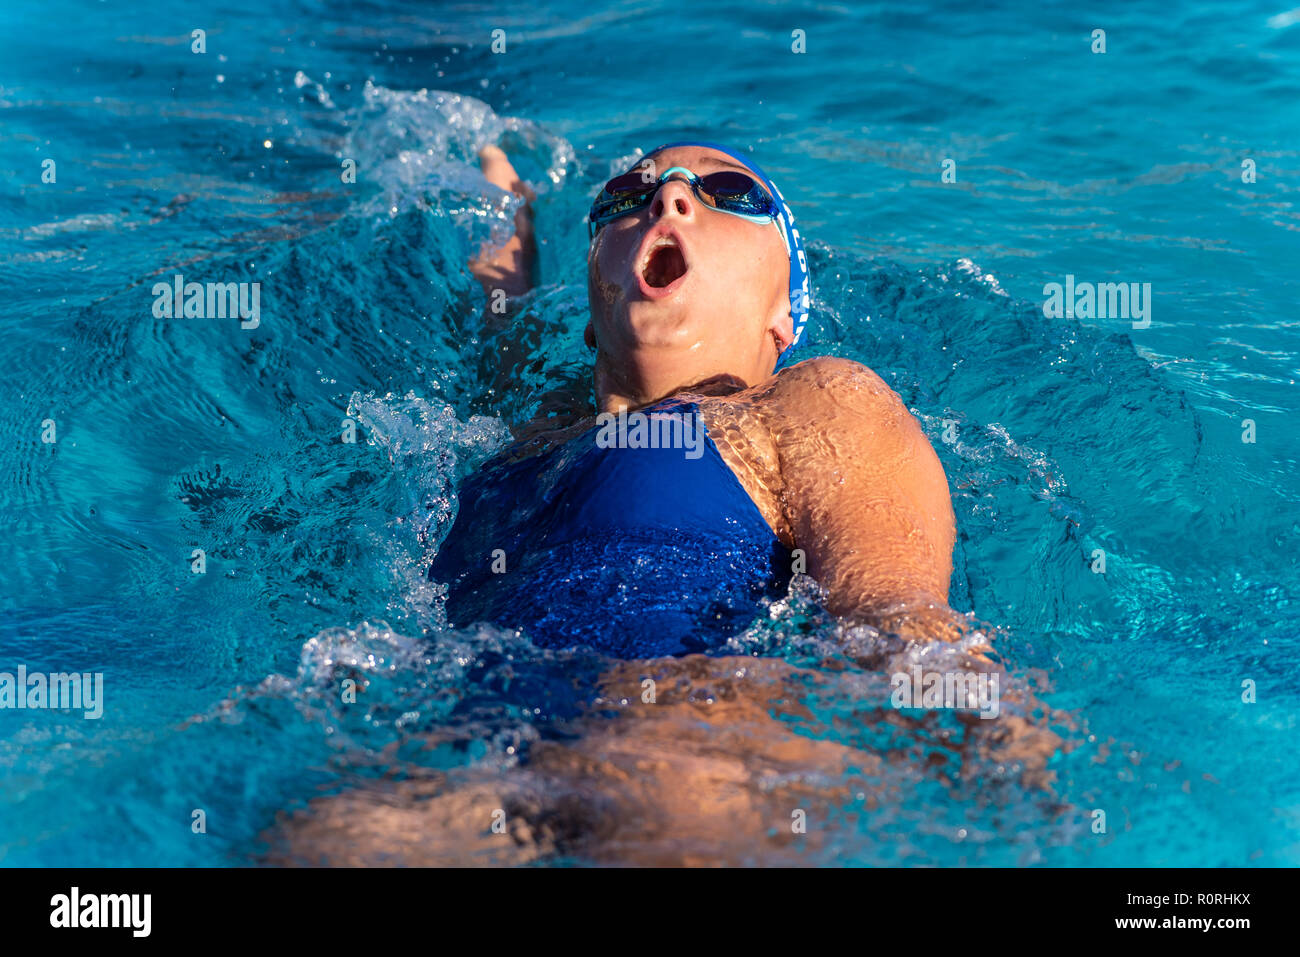 Competitive female swimmer taking big breath of air as she speeds toward finish line during backstroke race. Stock Photo